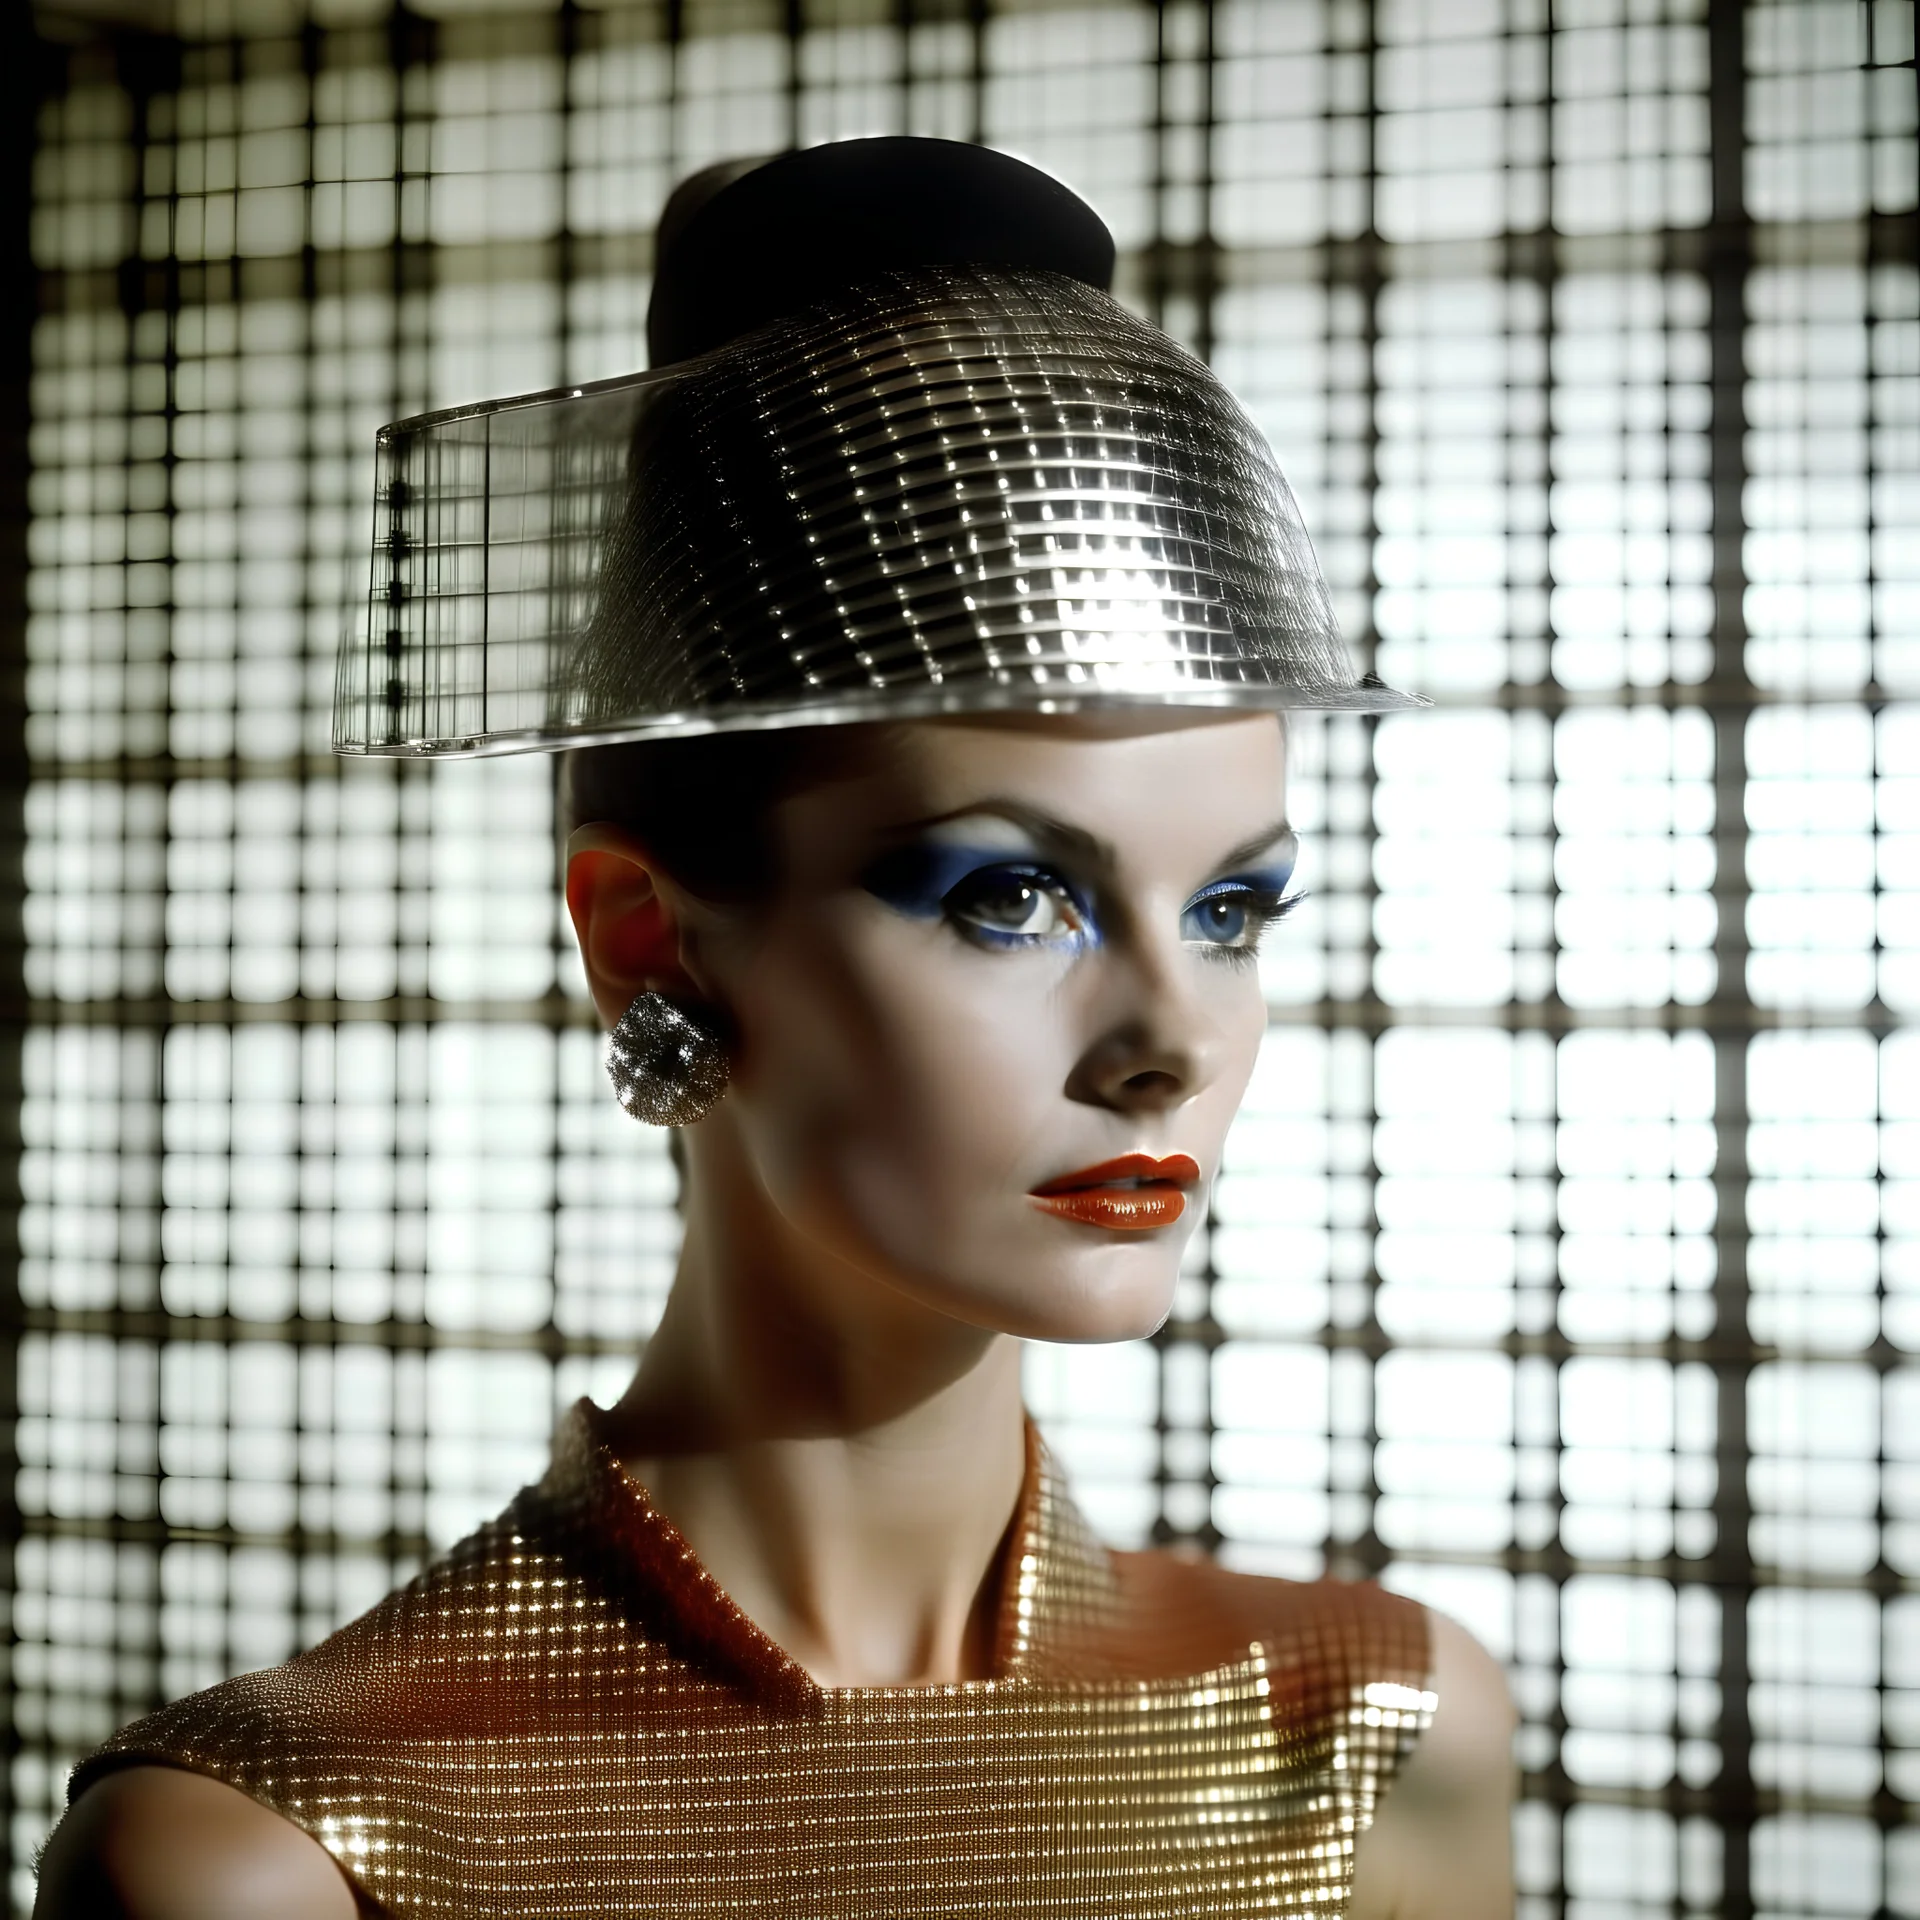 use pieces of grid mirror glass for materials, splice a headpiece, 1960s style with monitor eyes, show a sense of conformity